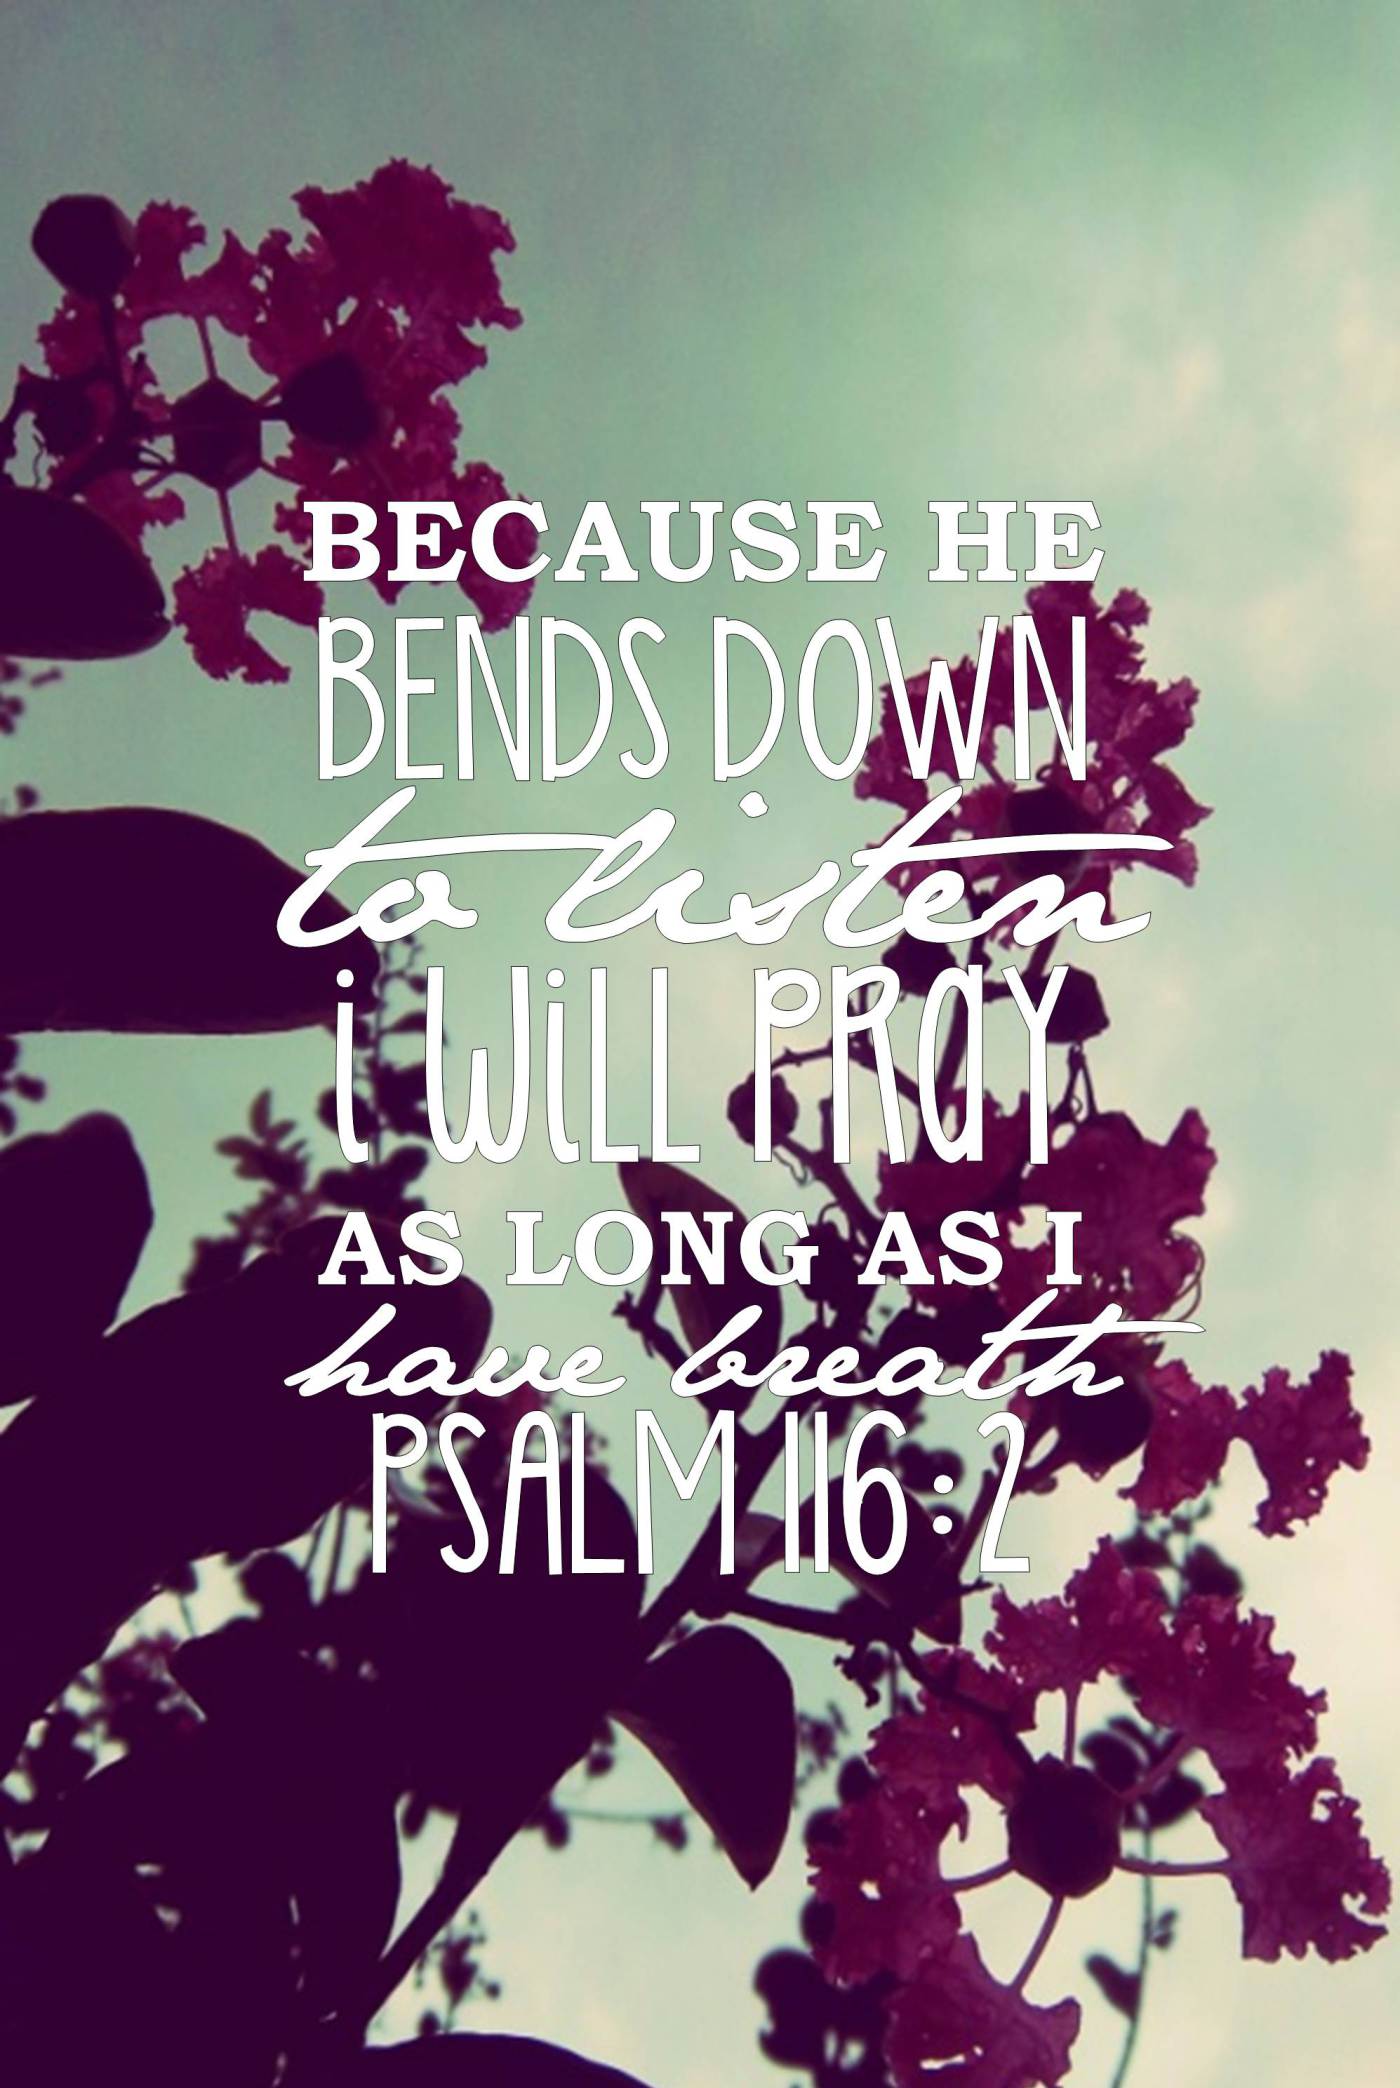 Pretty Christian iPhone wallpaper. Psalms is my favorite book of ...